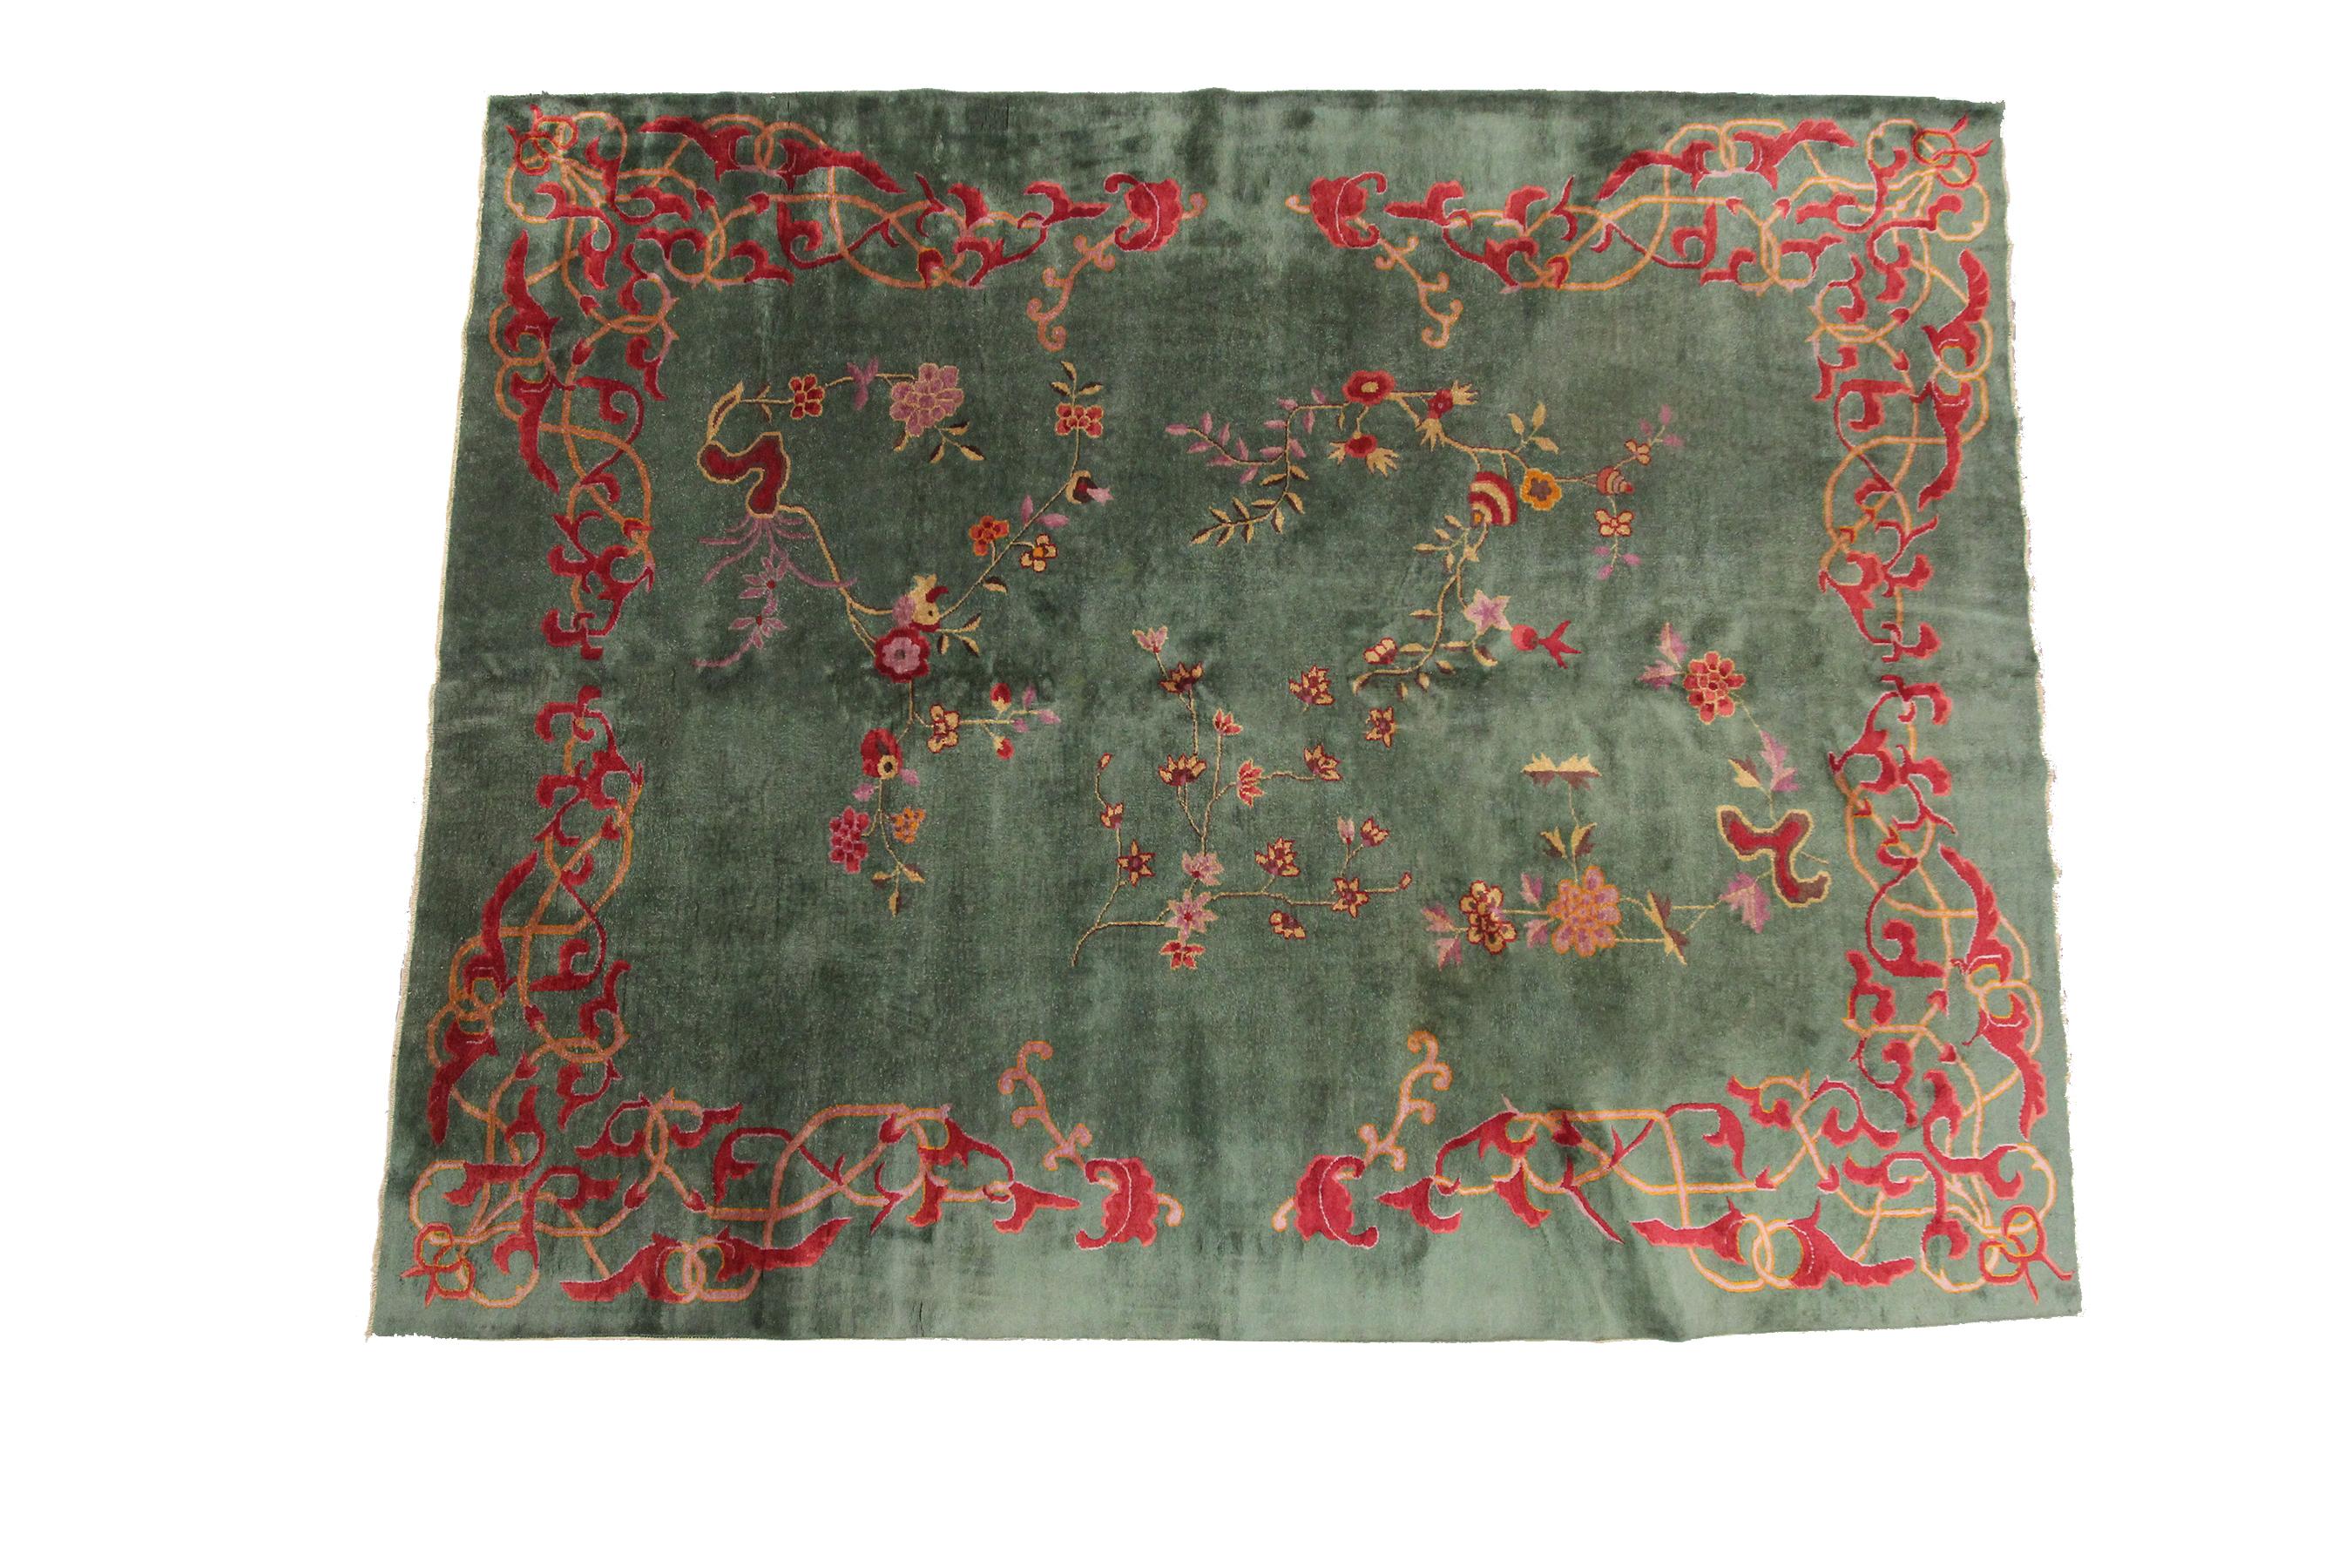 Hand-Knotted Antique Art Deco Chinese Rug Antique Chinese Rug Antique Art Deco Rug Green